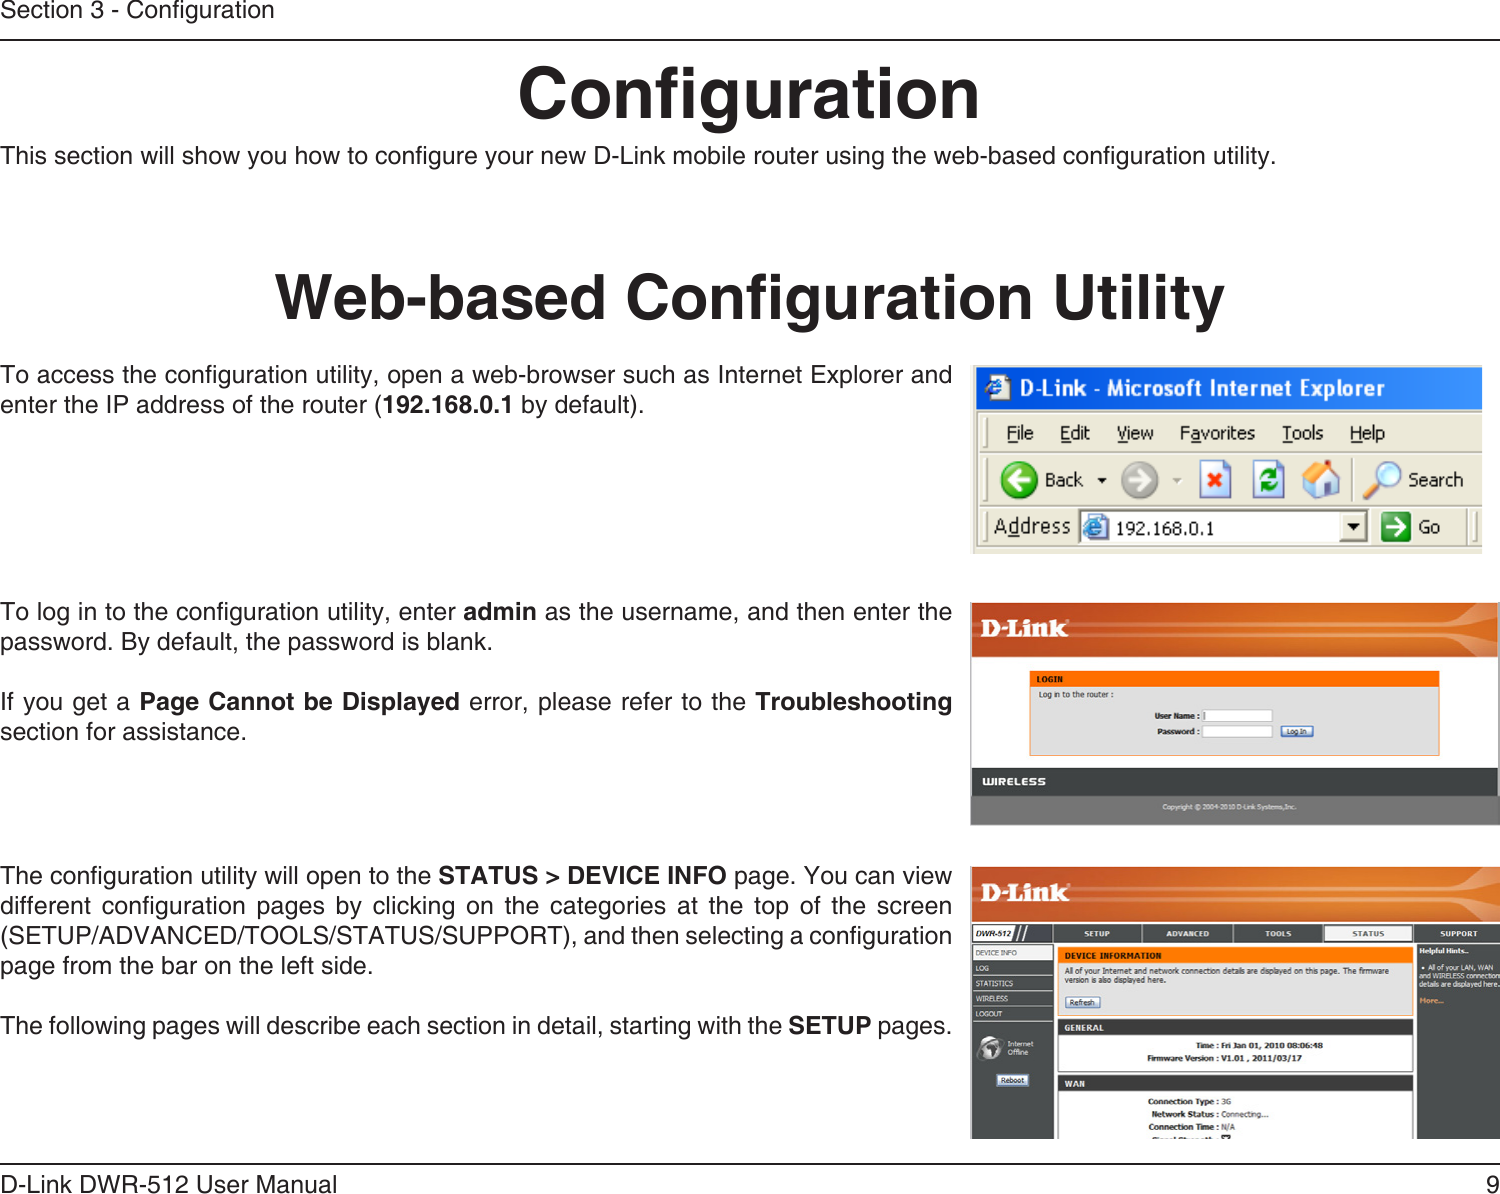 9D-Link DWR-512 User ManualSection 3 - CongurationCongurationThis section will show you how to congure your new D-Link mobile router using the web-based conguration utility.Web-based Conguration UtilityTo access the conguration utility, open a web-browser such as Internet Explorer and enter the IP address of the router (192.168.0.1 by default).To log in to the conguration utility, enter admin as the username, and then enter the password. By default, the password is blank.If you get a Page Cannot be Displayed error, please refer to the Troubleshooting section for assistance.The conguration utility will open to the STATUS &gt; DEVICE INFO page. You can view different  conguration  pages  by  clicking  on  the  categories  at  the  top  of  the  screen (SETUP/ADVANCED/TOOLS/STATUS/SUPPORT), and then selecting a conguration page from the bar on the left side.The following pages will describe each section in detail, starting with the SETUP pages.